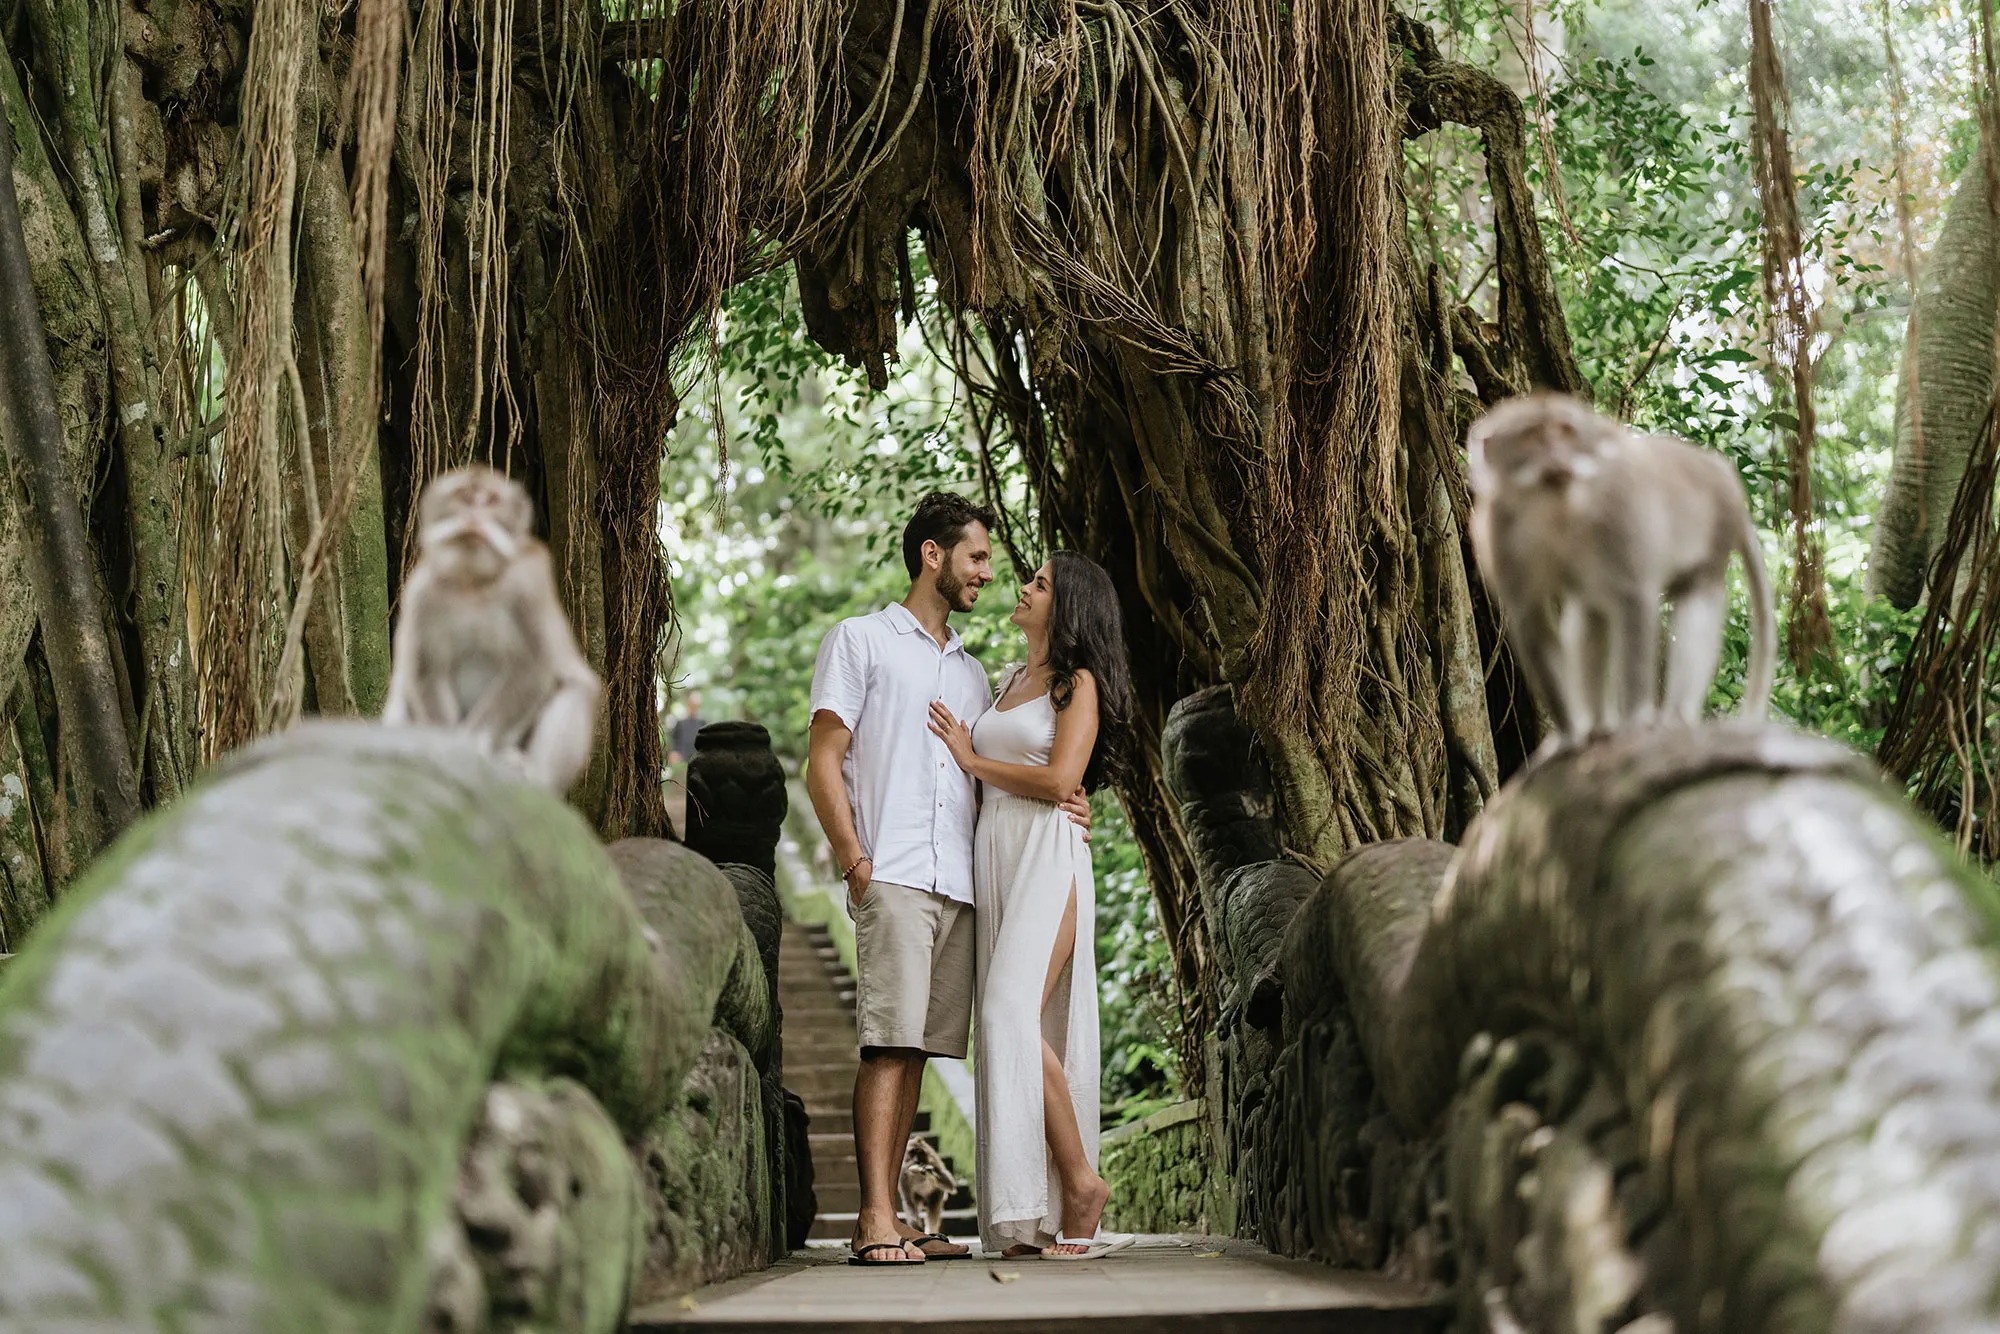 Simplest ways to Make Your Honeymoon in Bali More Exciting